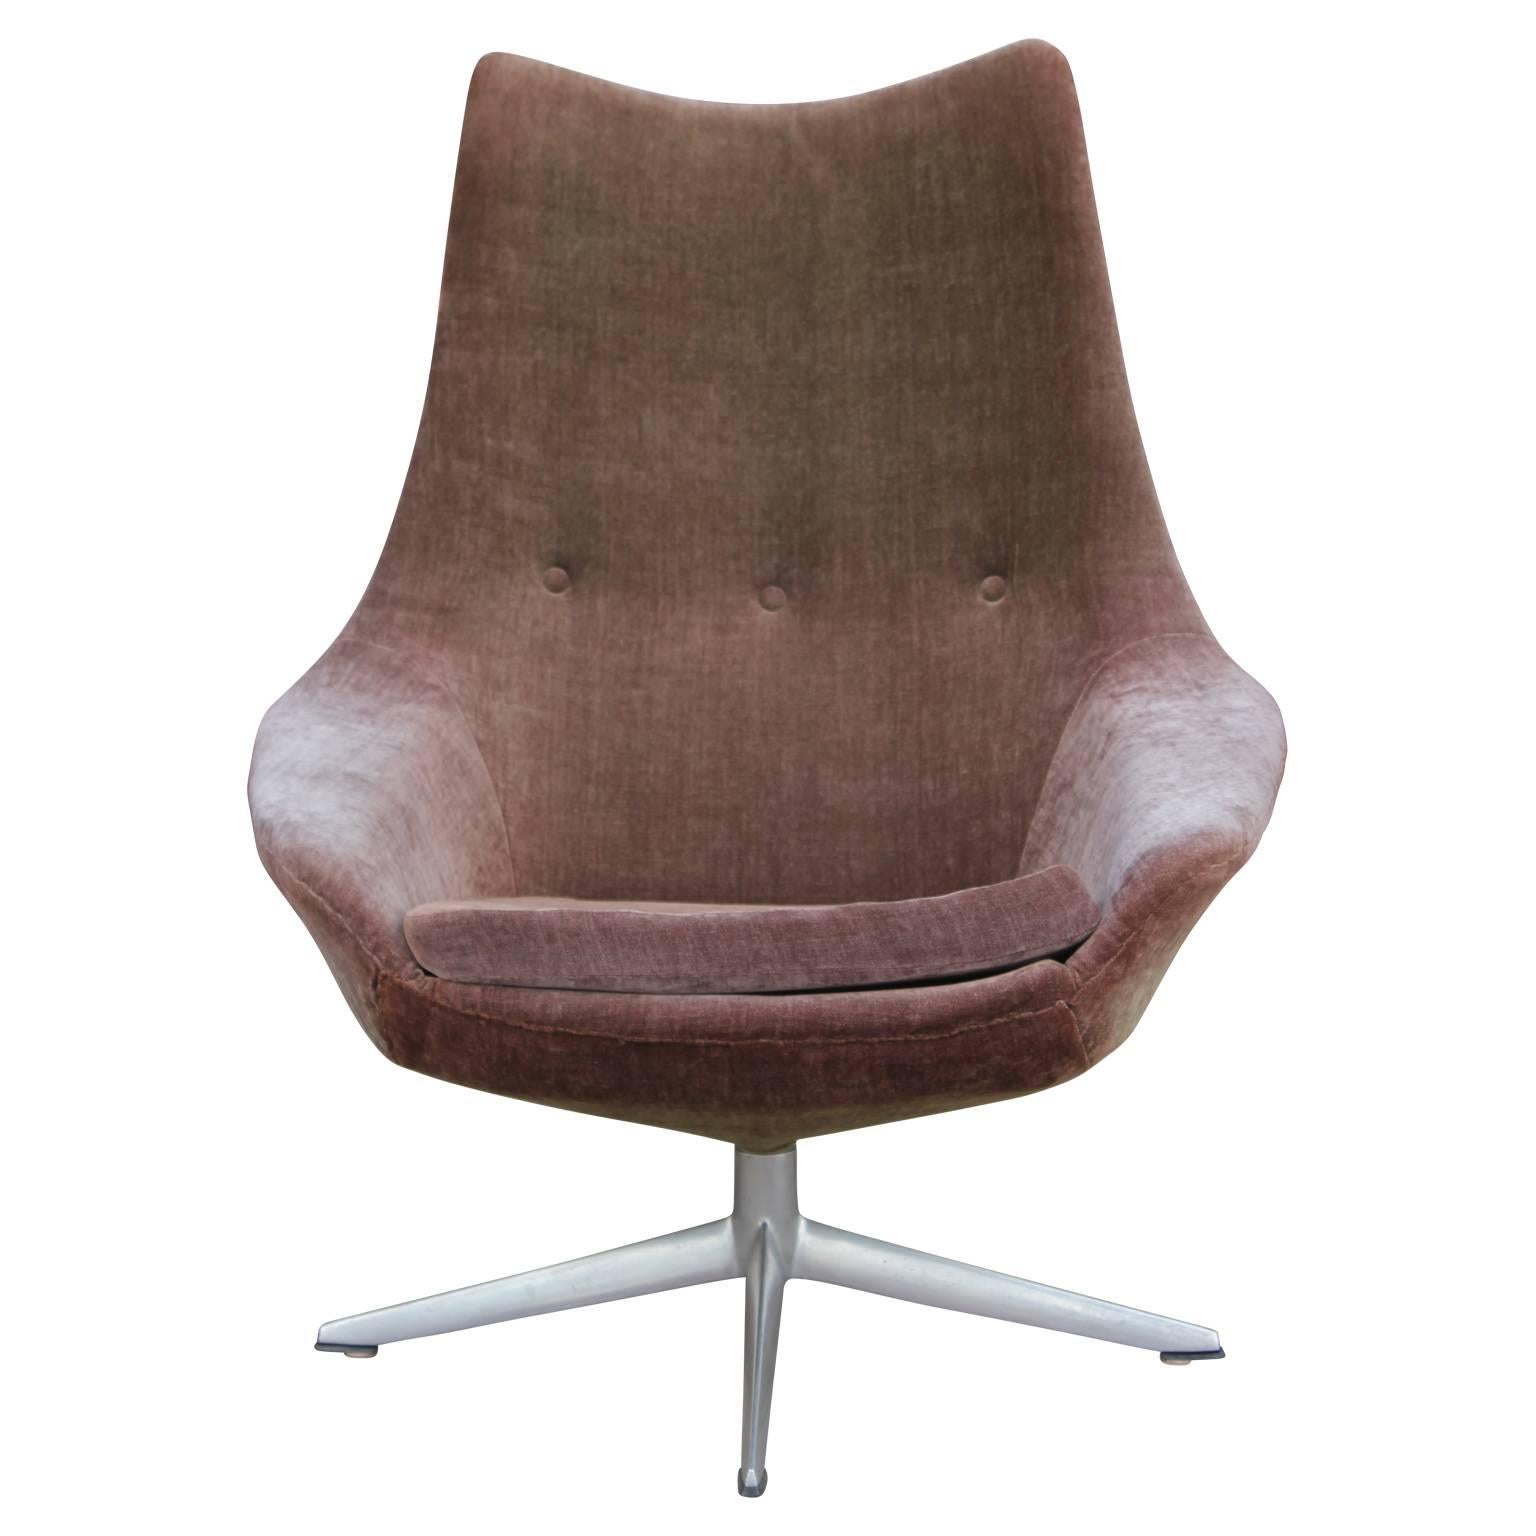 H.W. Klein for Bramin Møbler, upholstered in original fabric with an aluminum base. A great example of Scandinavian design and comfort that would be perfect to modernize any space.